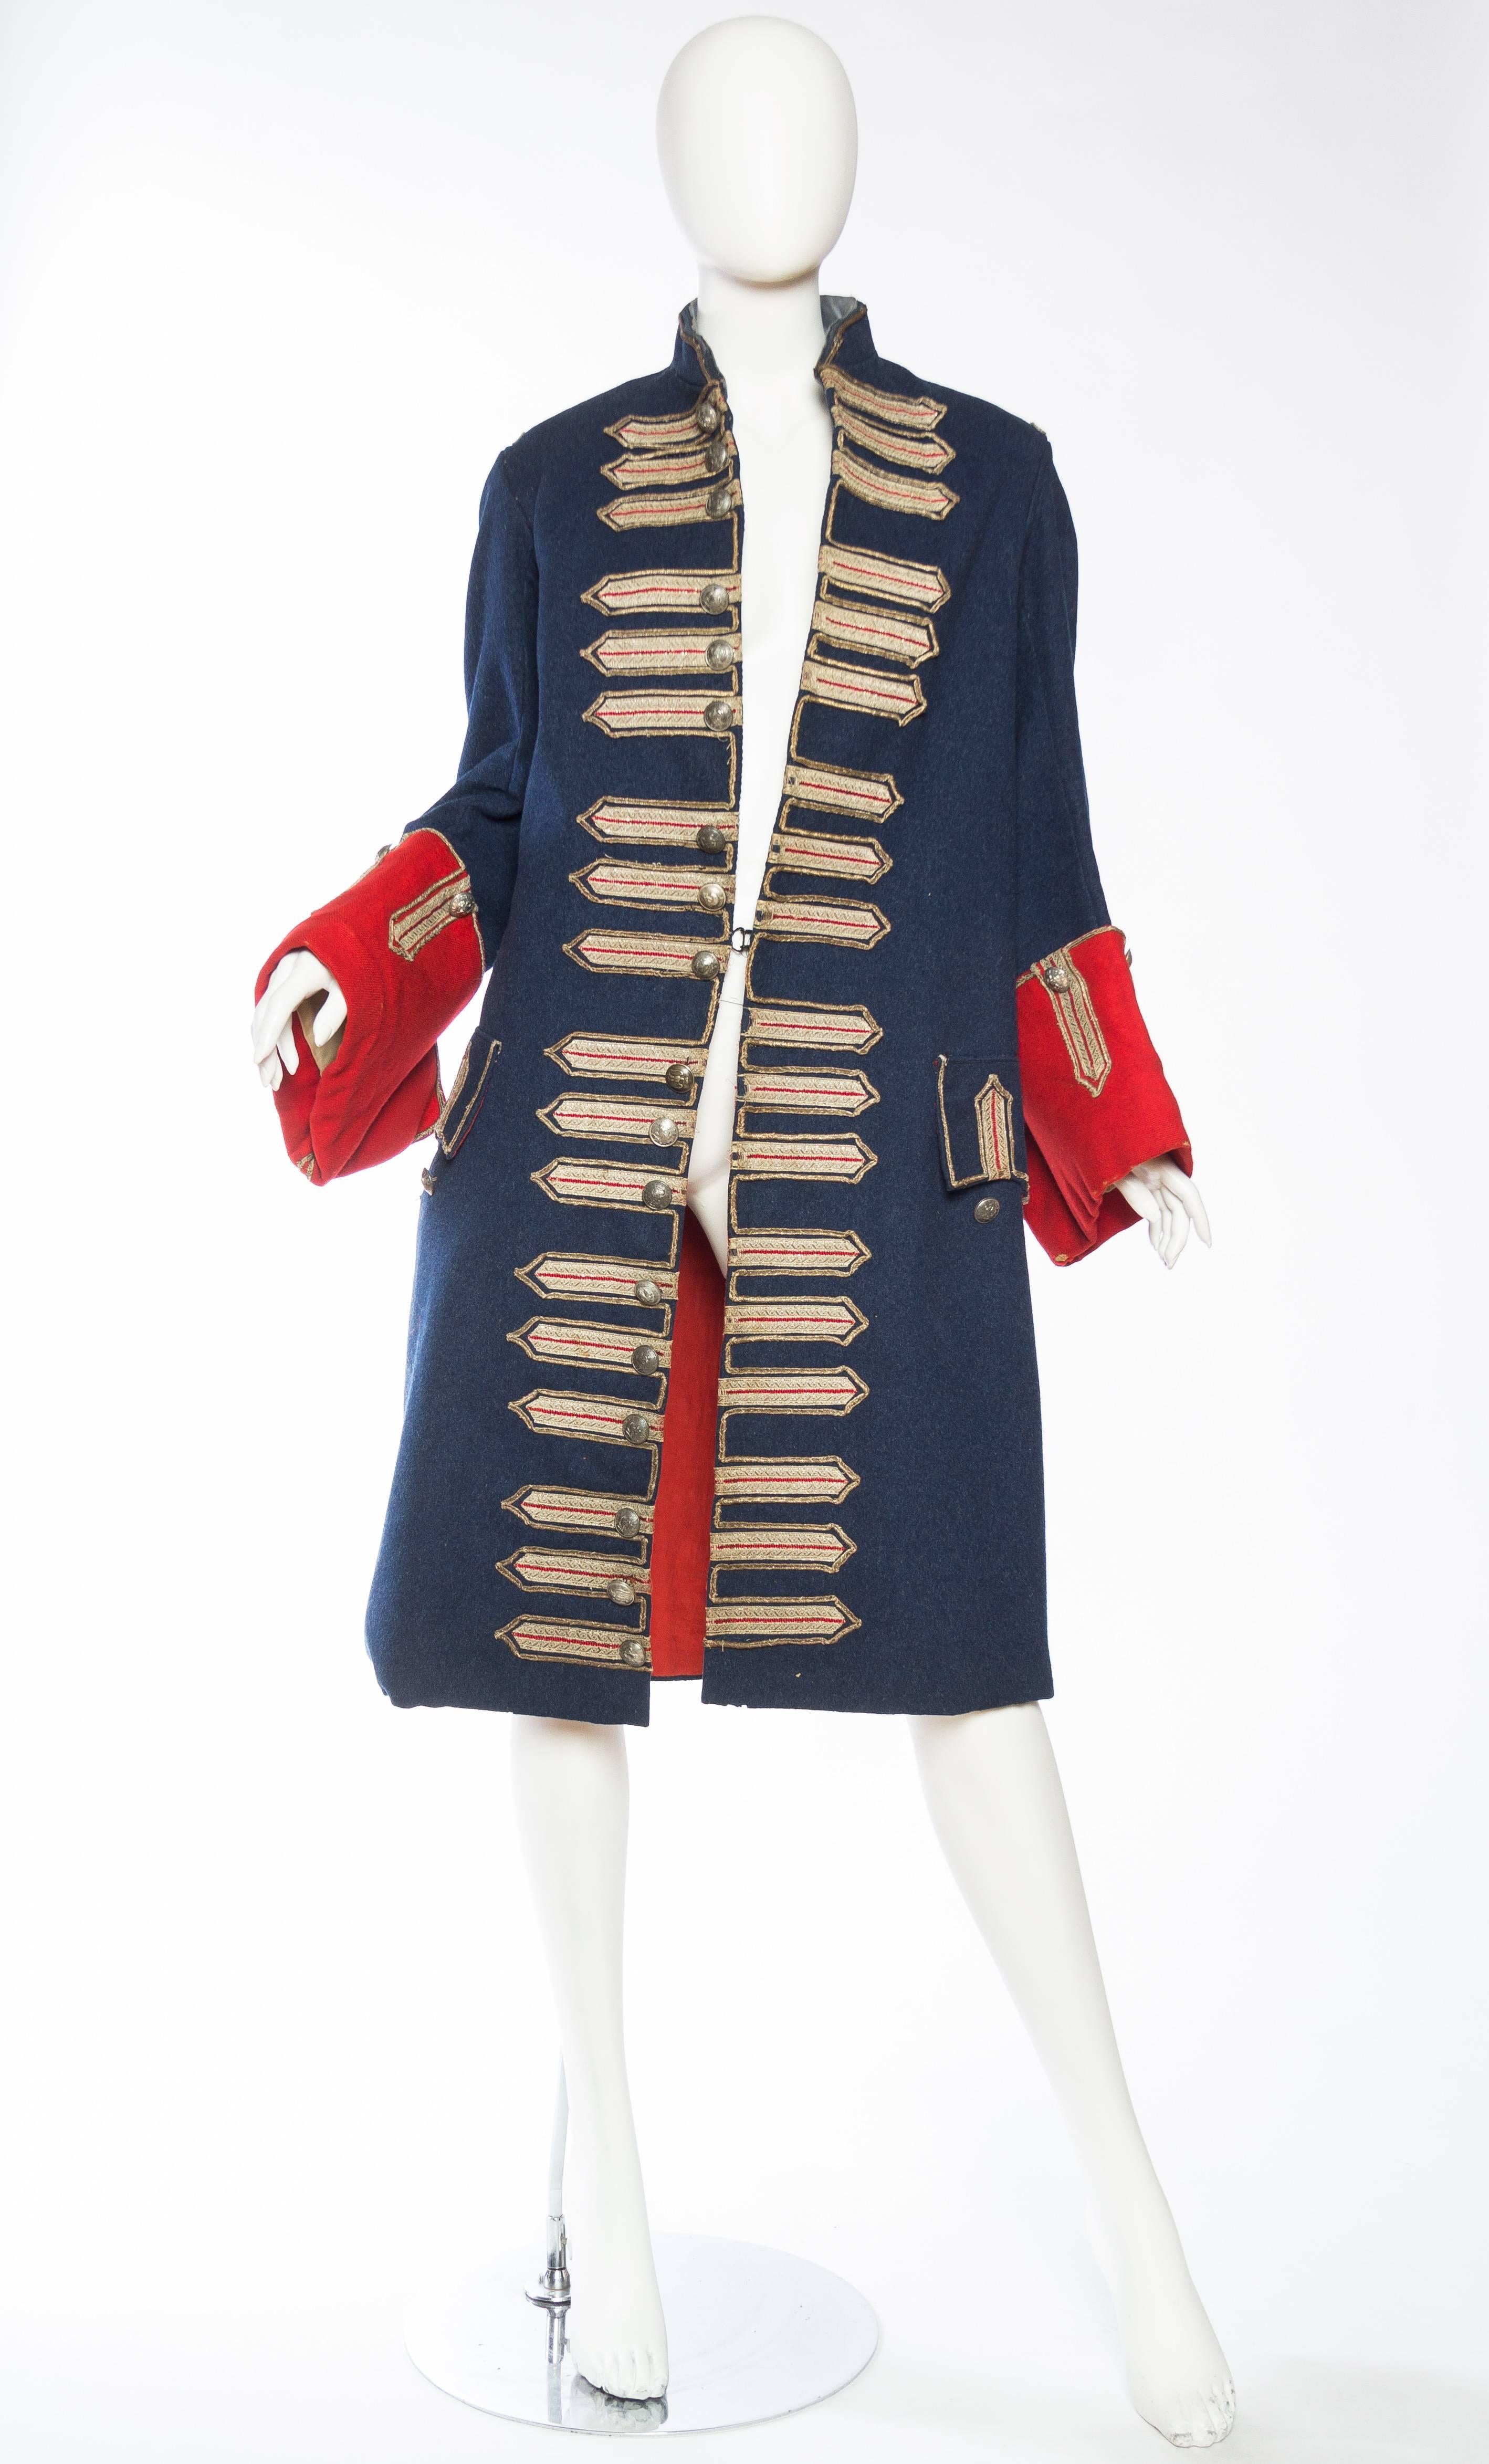 The materials of this coat date it to the latter half of the 19th century. The style however dates to the early to mid 18th century. Wonderfully detailed and made by hand, fully lined in cotton and detailed with real silver braid and official